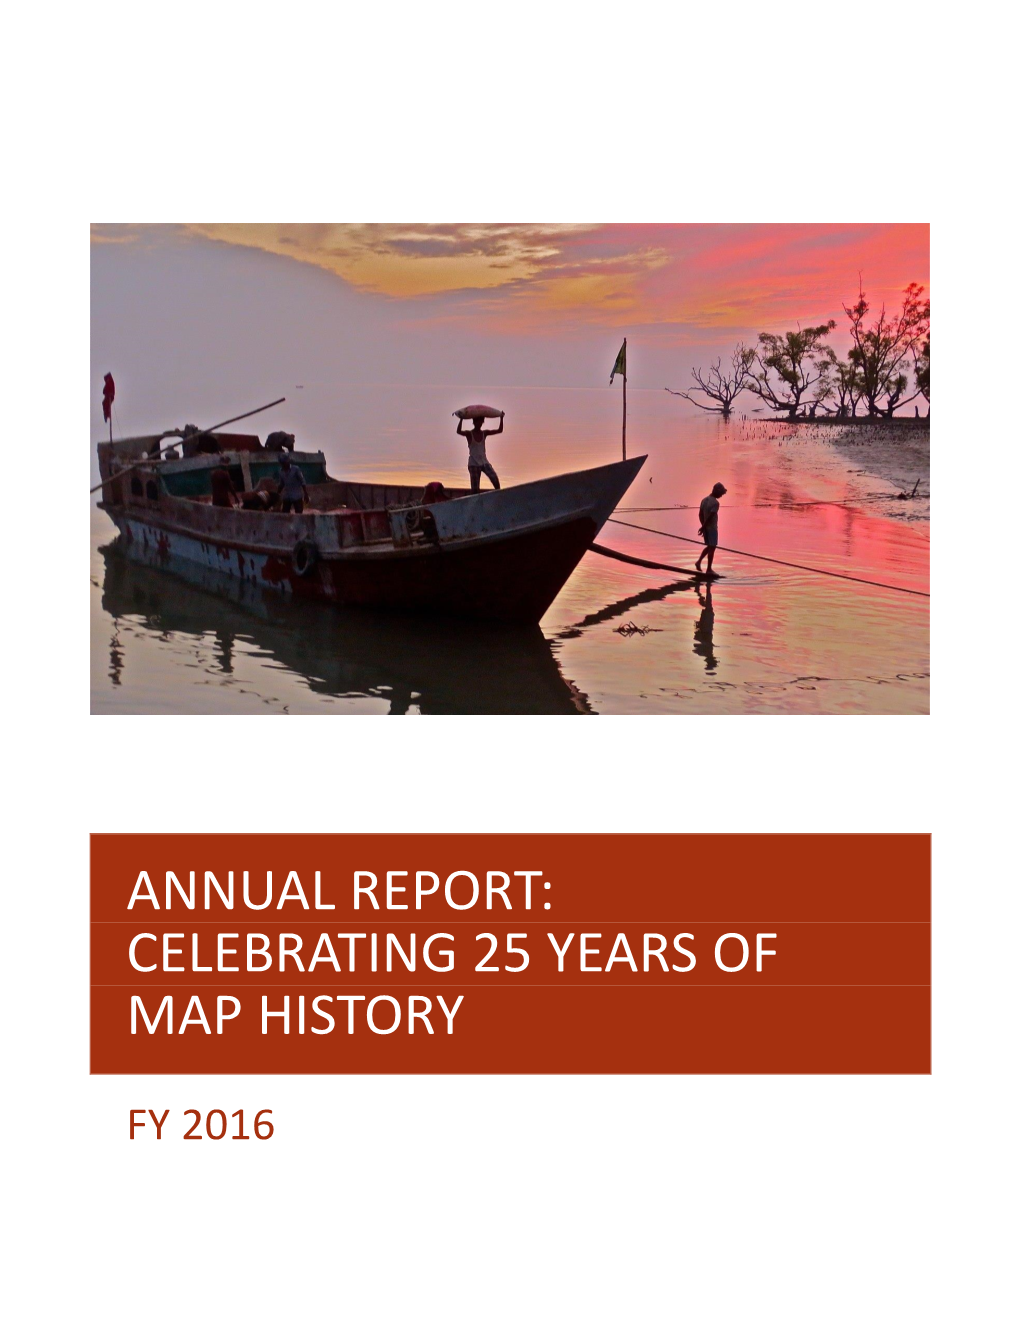 Annual Report: Celebrating 25 Years of Map History